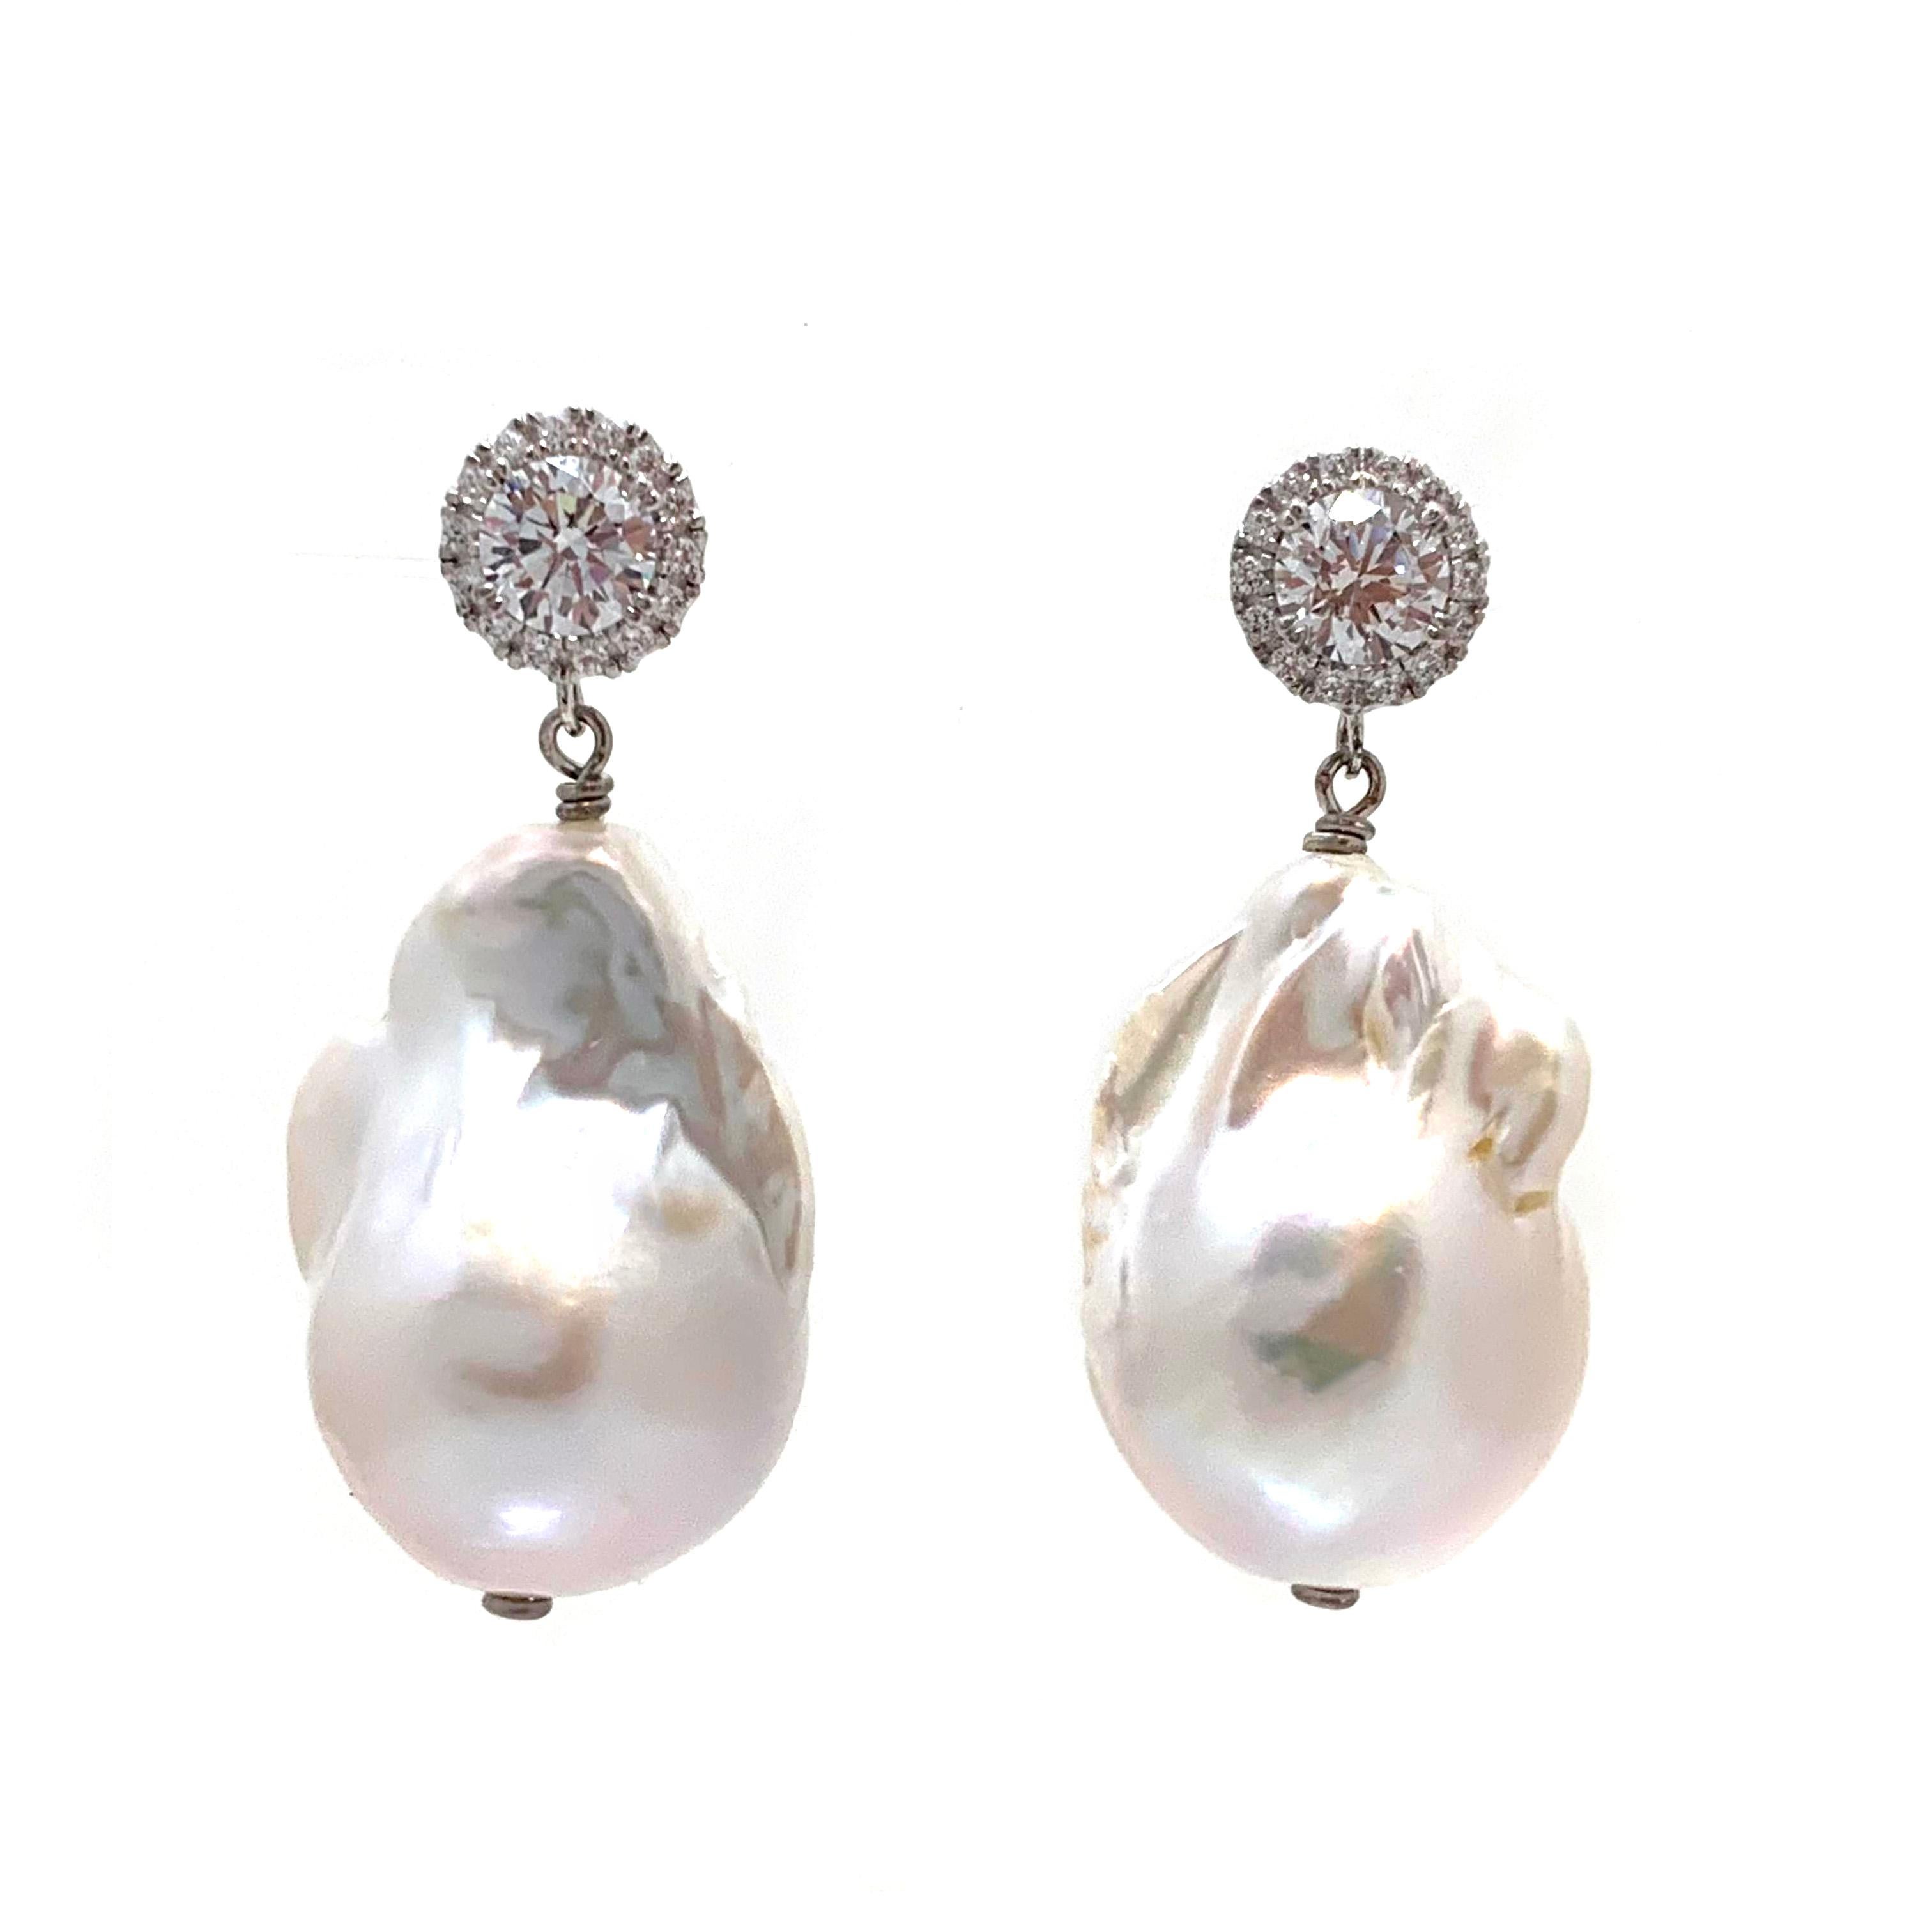 Beautiful pair of large lustrous freshwater baroque pearl drop earrings with simulated diamond on top! 

The pearls measure 18mm width and 25mm height. Top part is 1ctw halo simulated diamond cz, handset in platinum rhodium plated sterling silver -